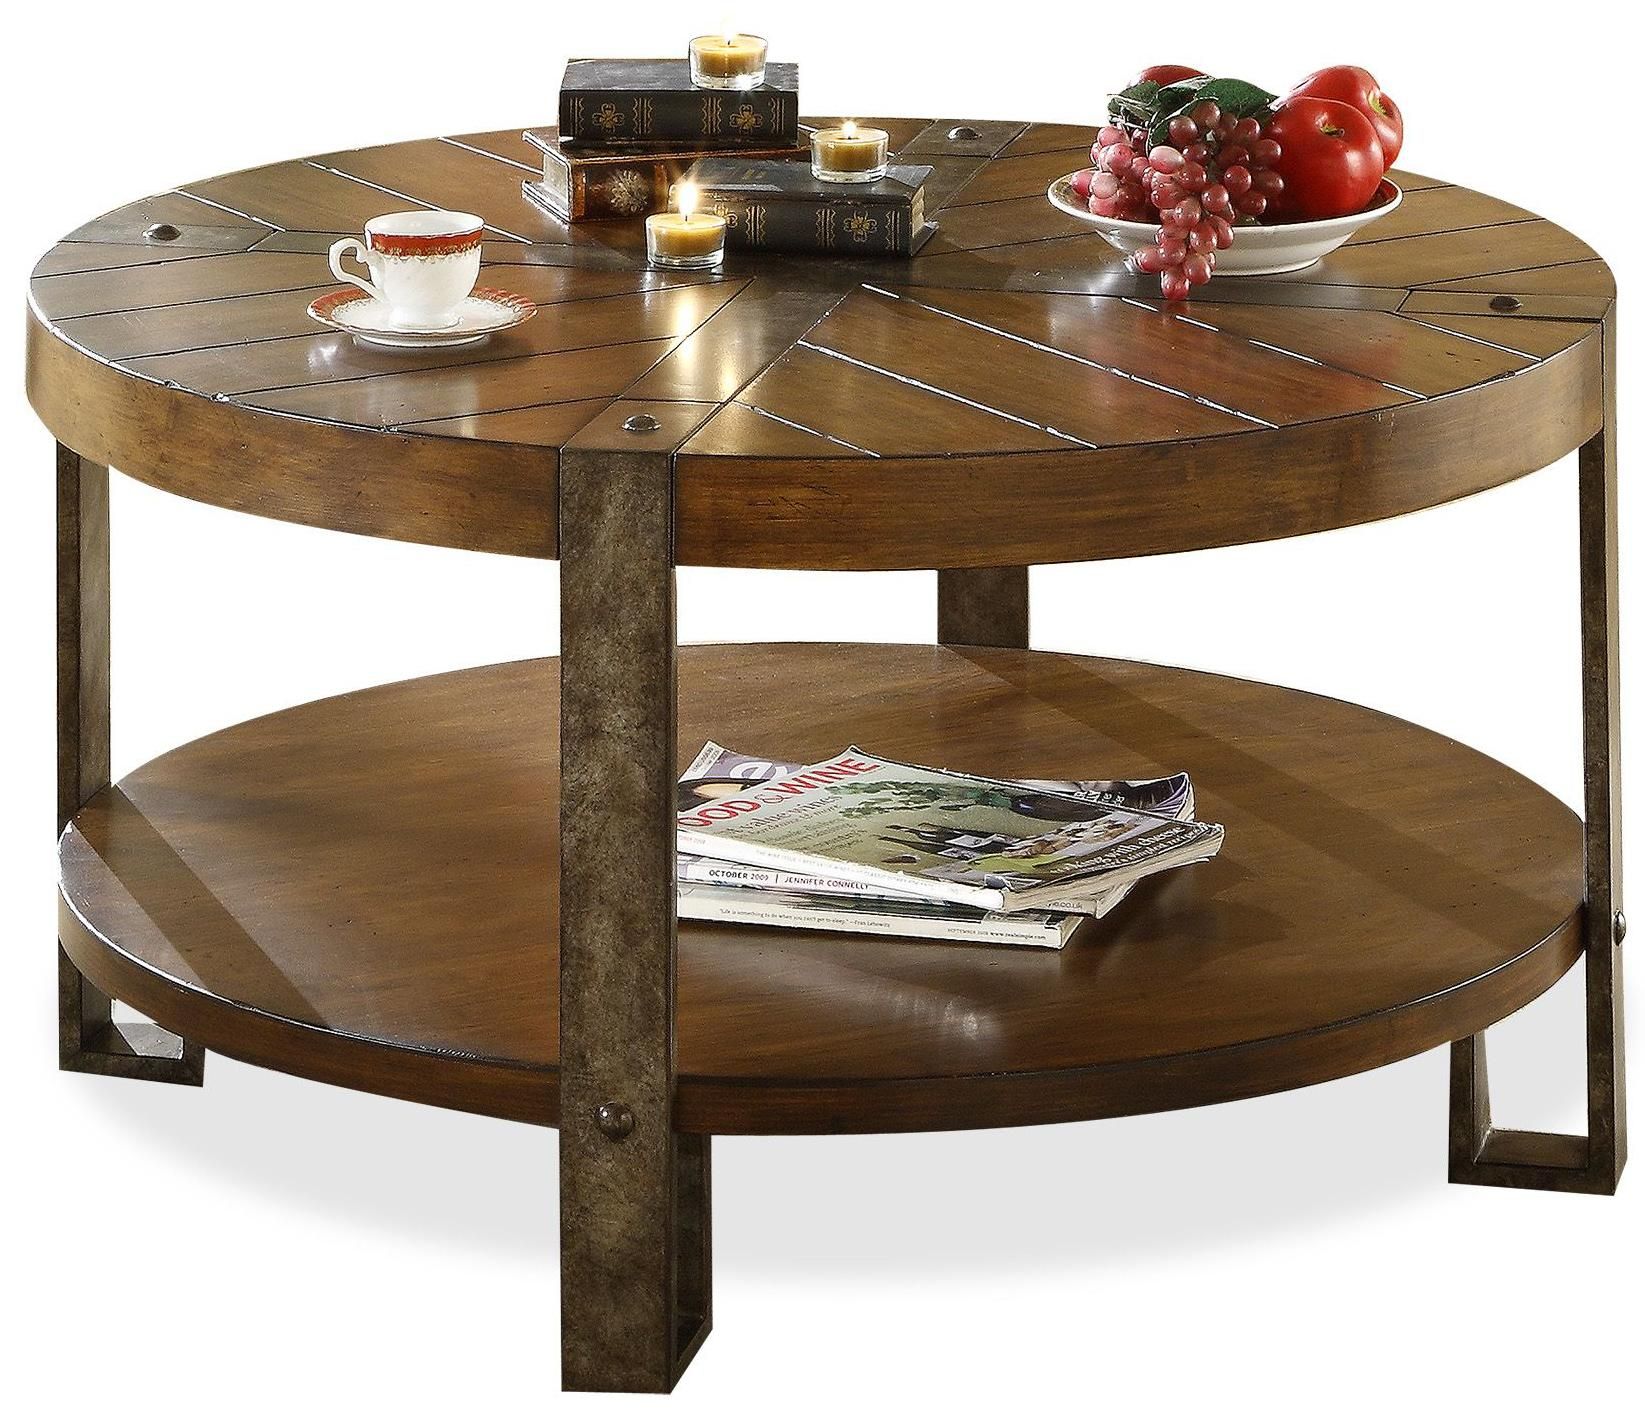 Awesome Round Coffee Tables With Storage | Homesfeed Inside Coffee Tables With Round Wooden Tops (Gallery 3 of 20)